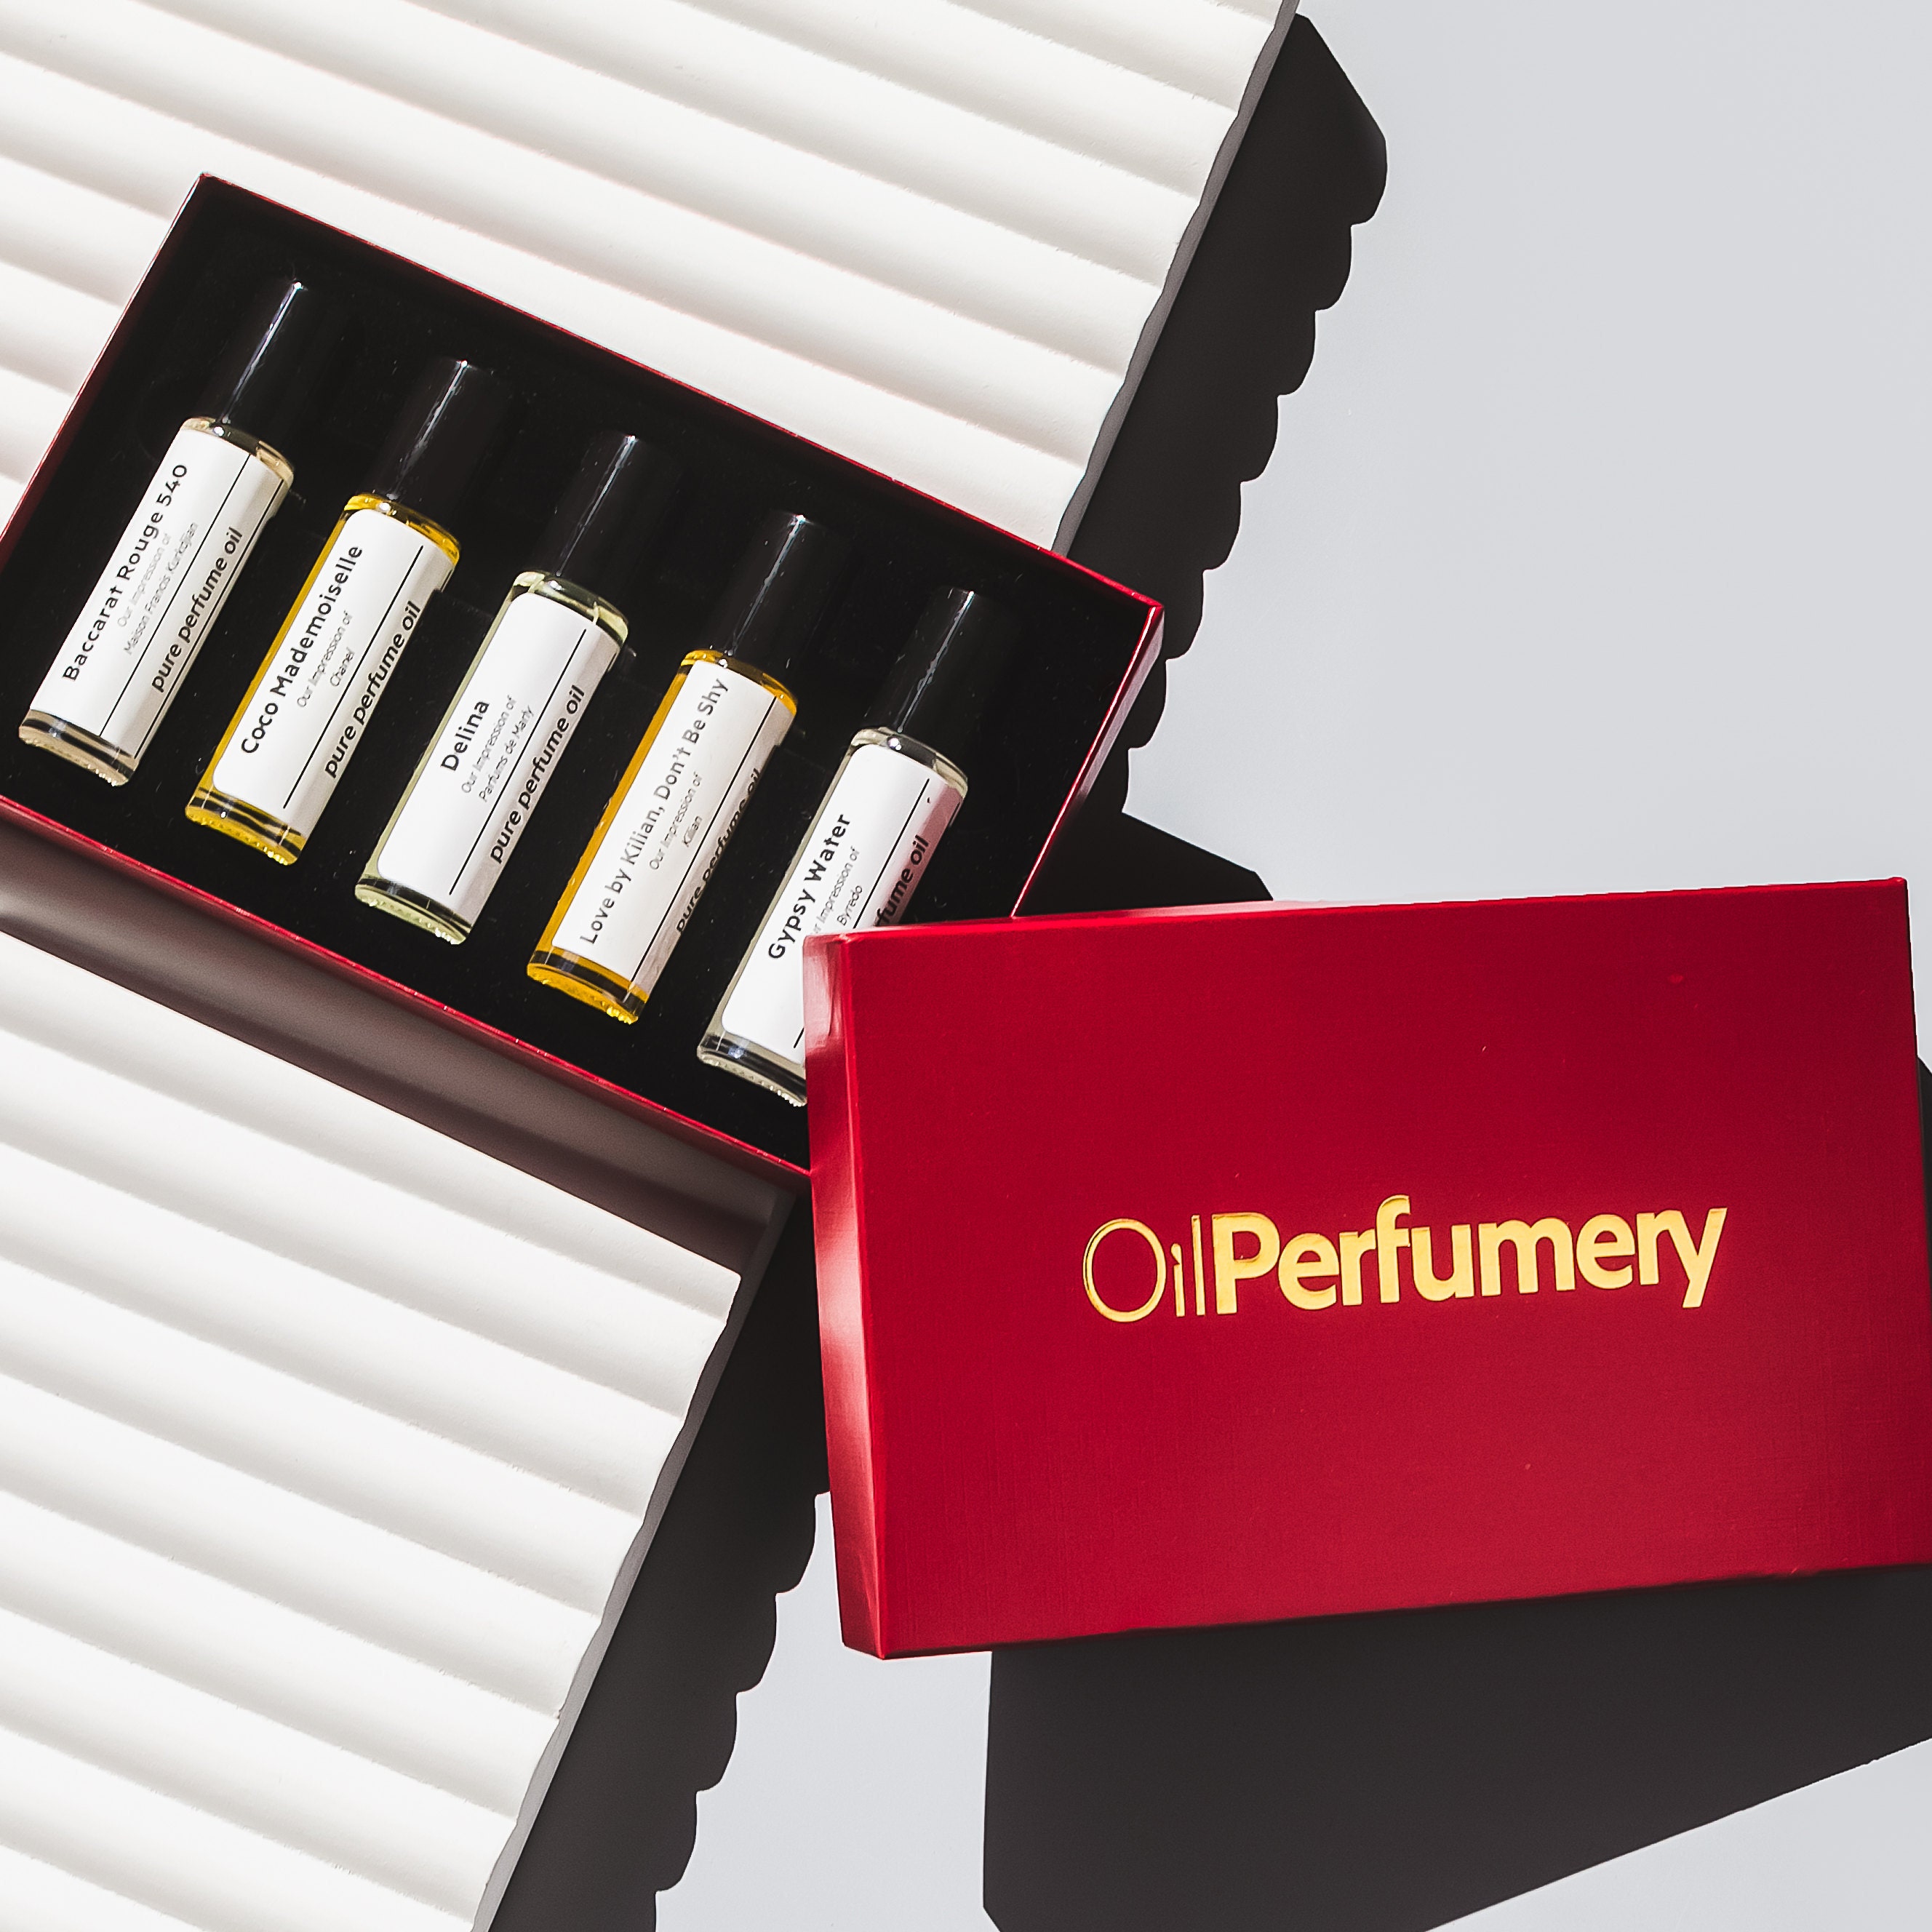 Oil Perfumery Impression of Parfums de Marly - Percival | 10 ml